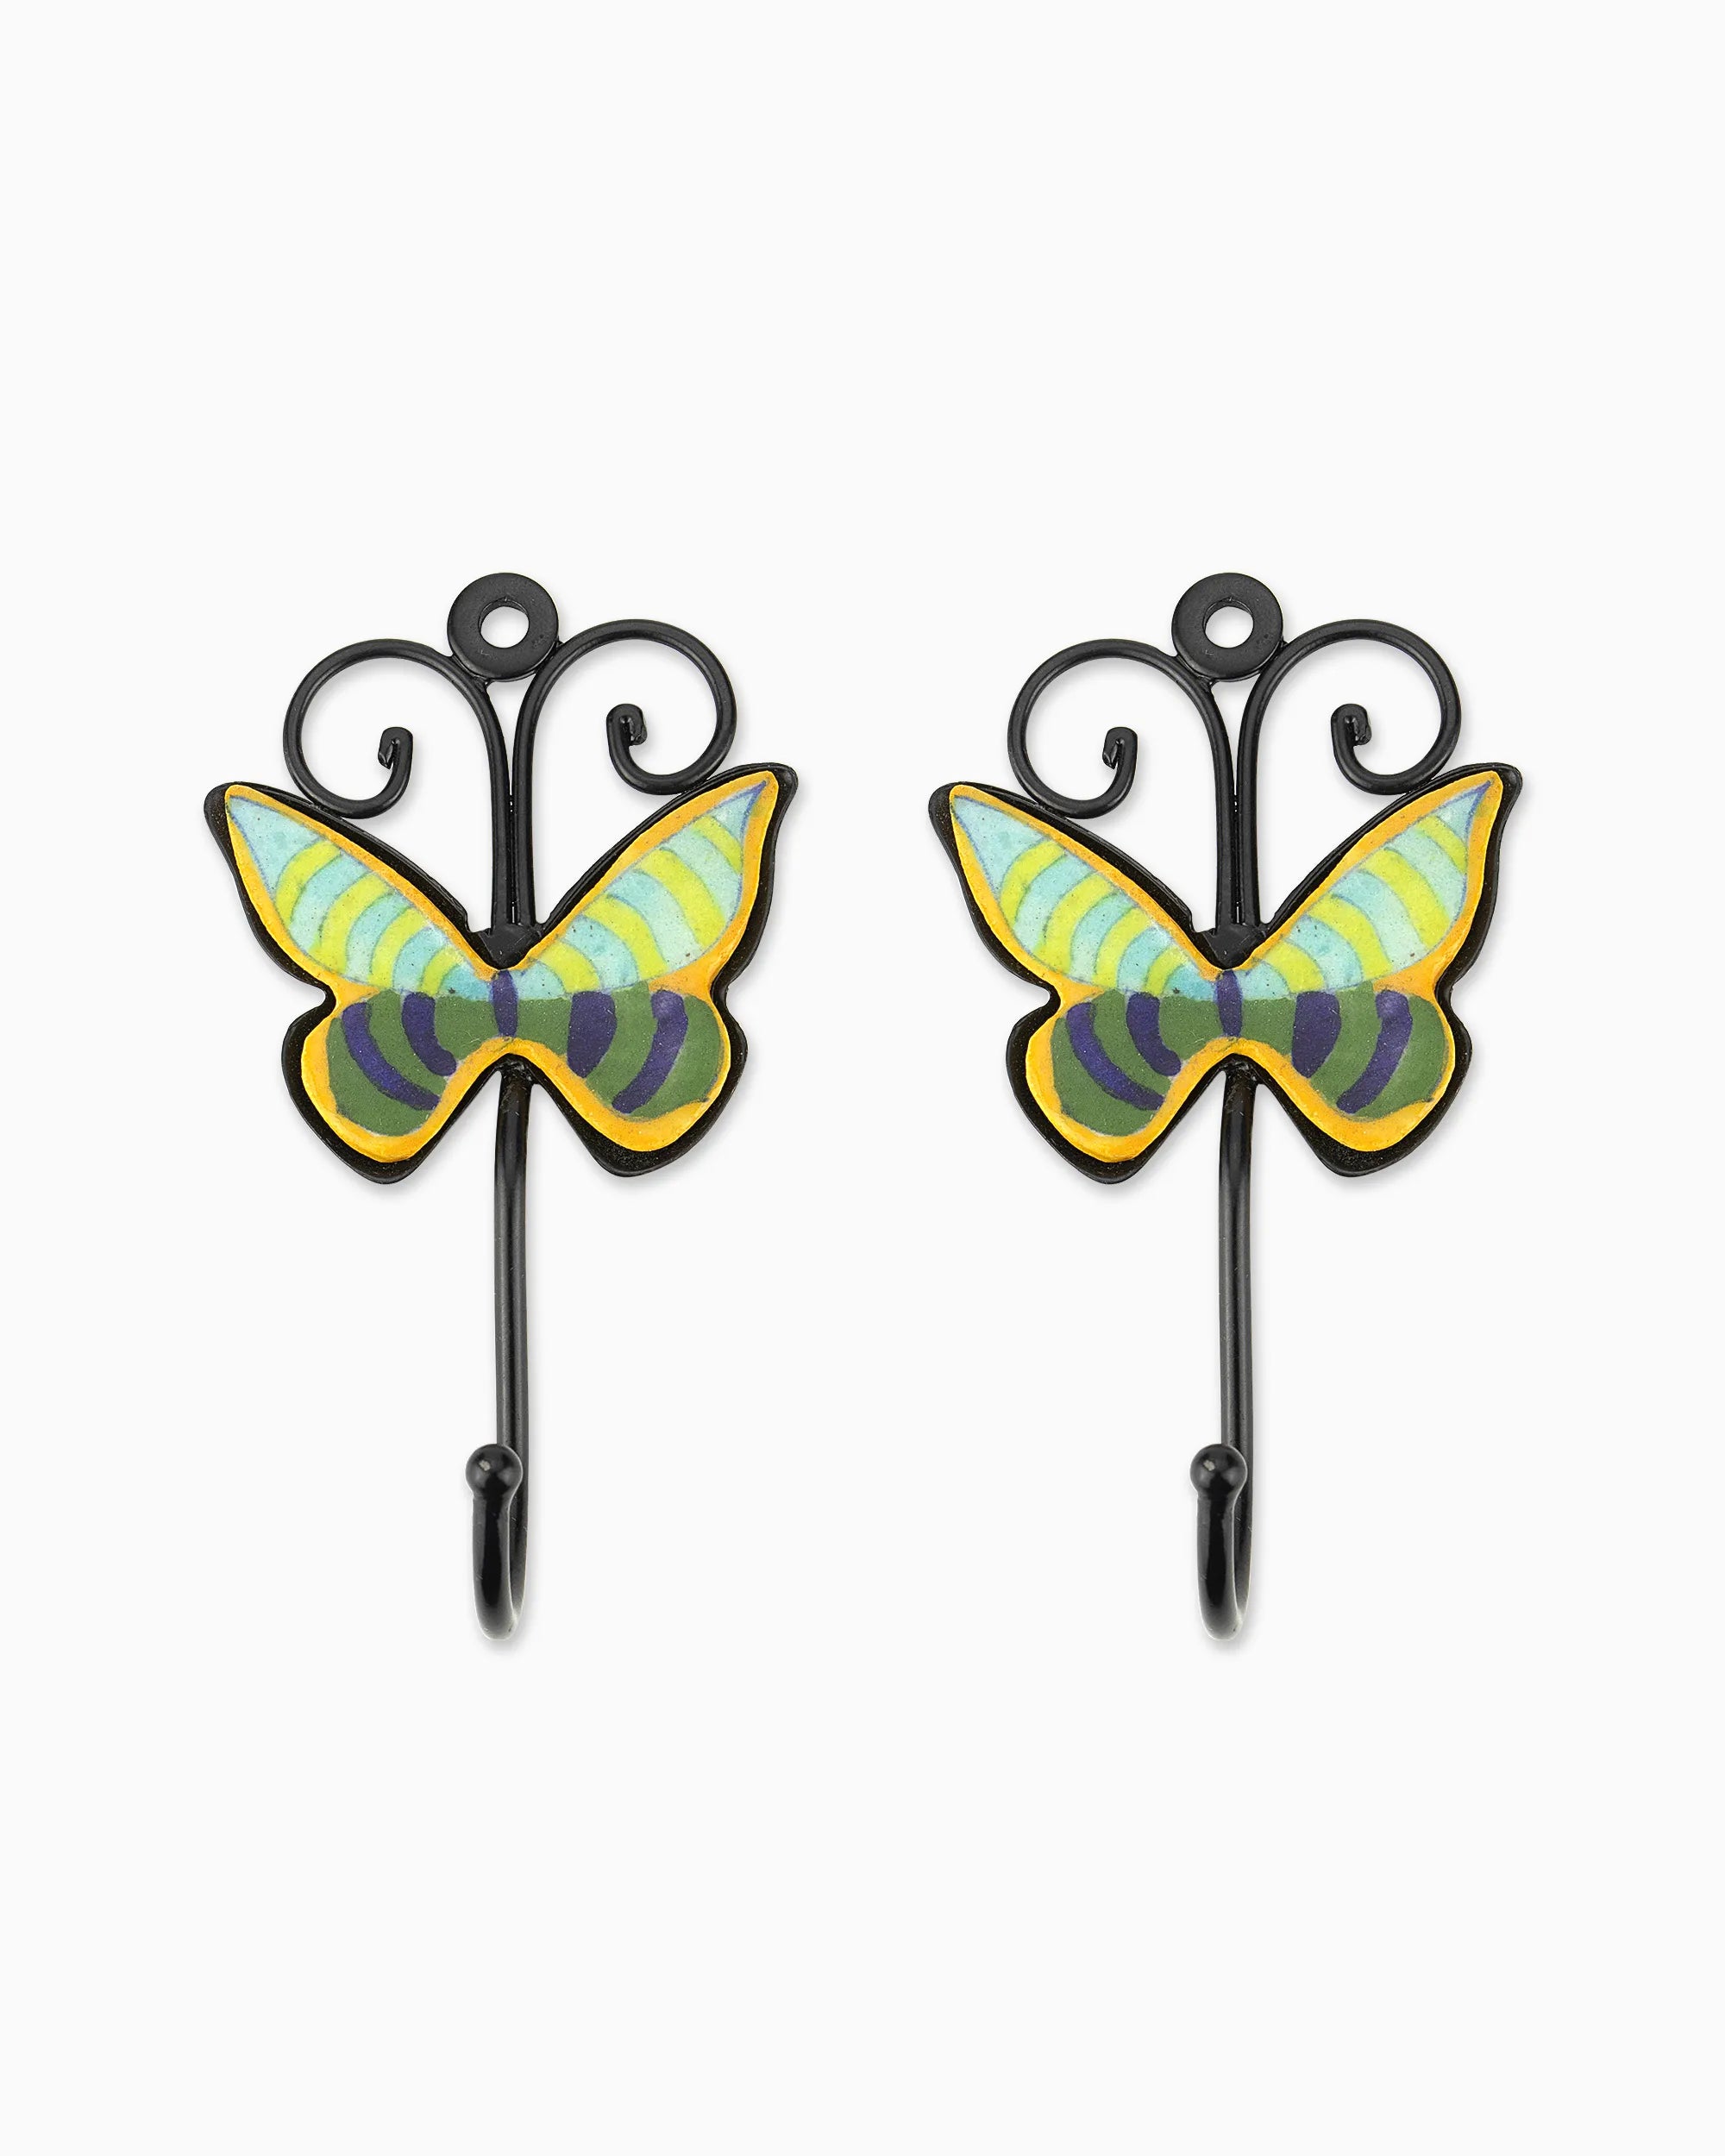 Ceramic Butterfly Iron Tile Hook (Set of 2)